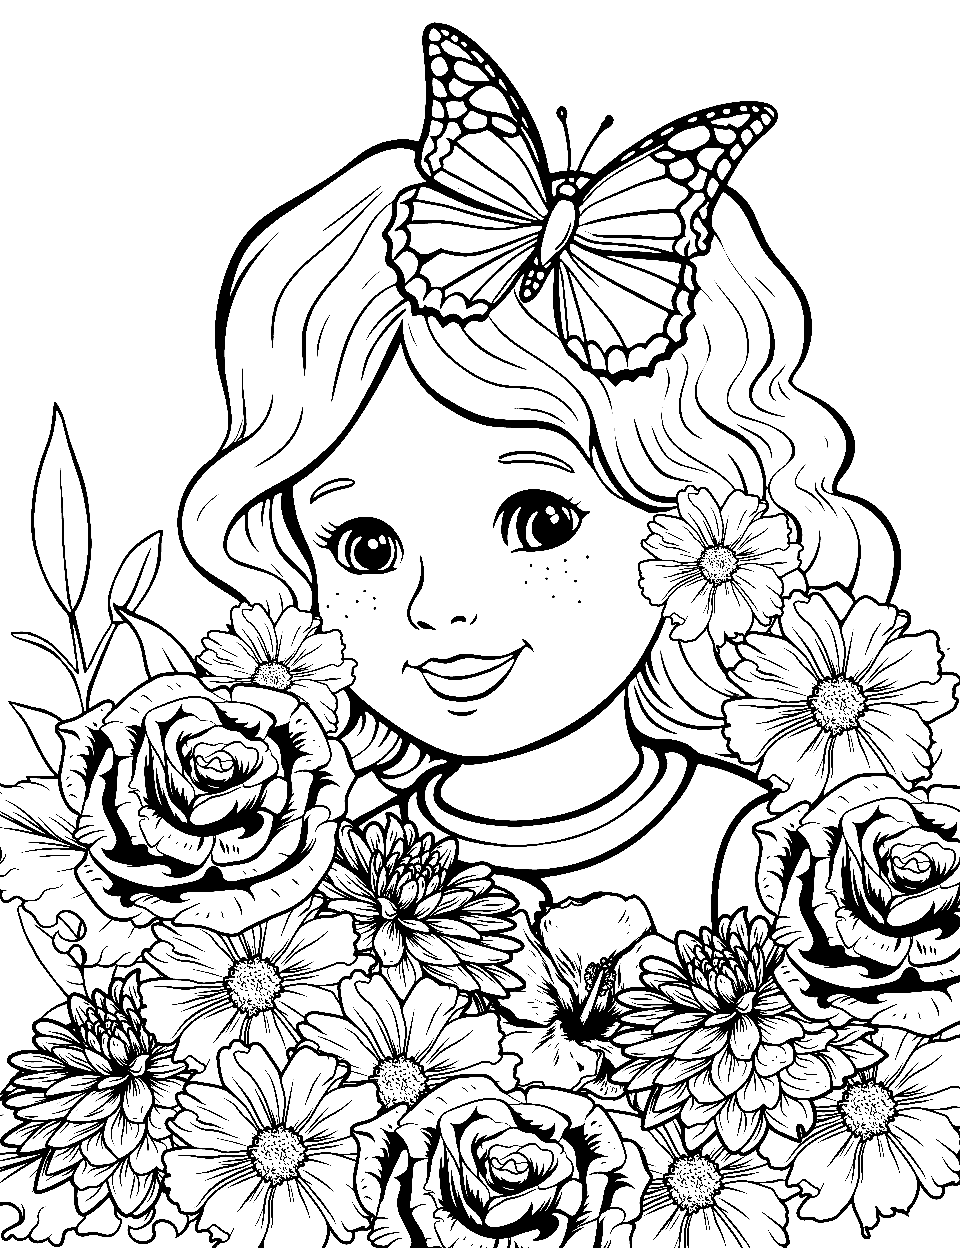 Garden Gathering Coloring Page - A detailed girl among flowers, plants, and a butterfly in a garden.